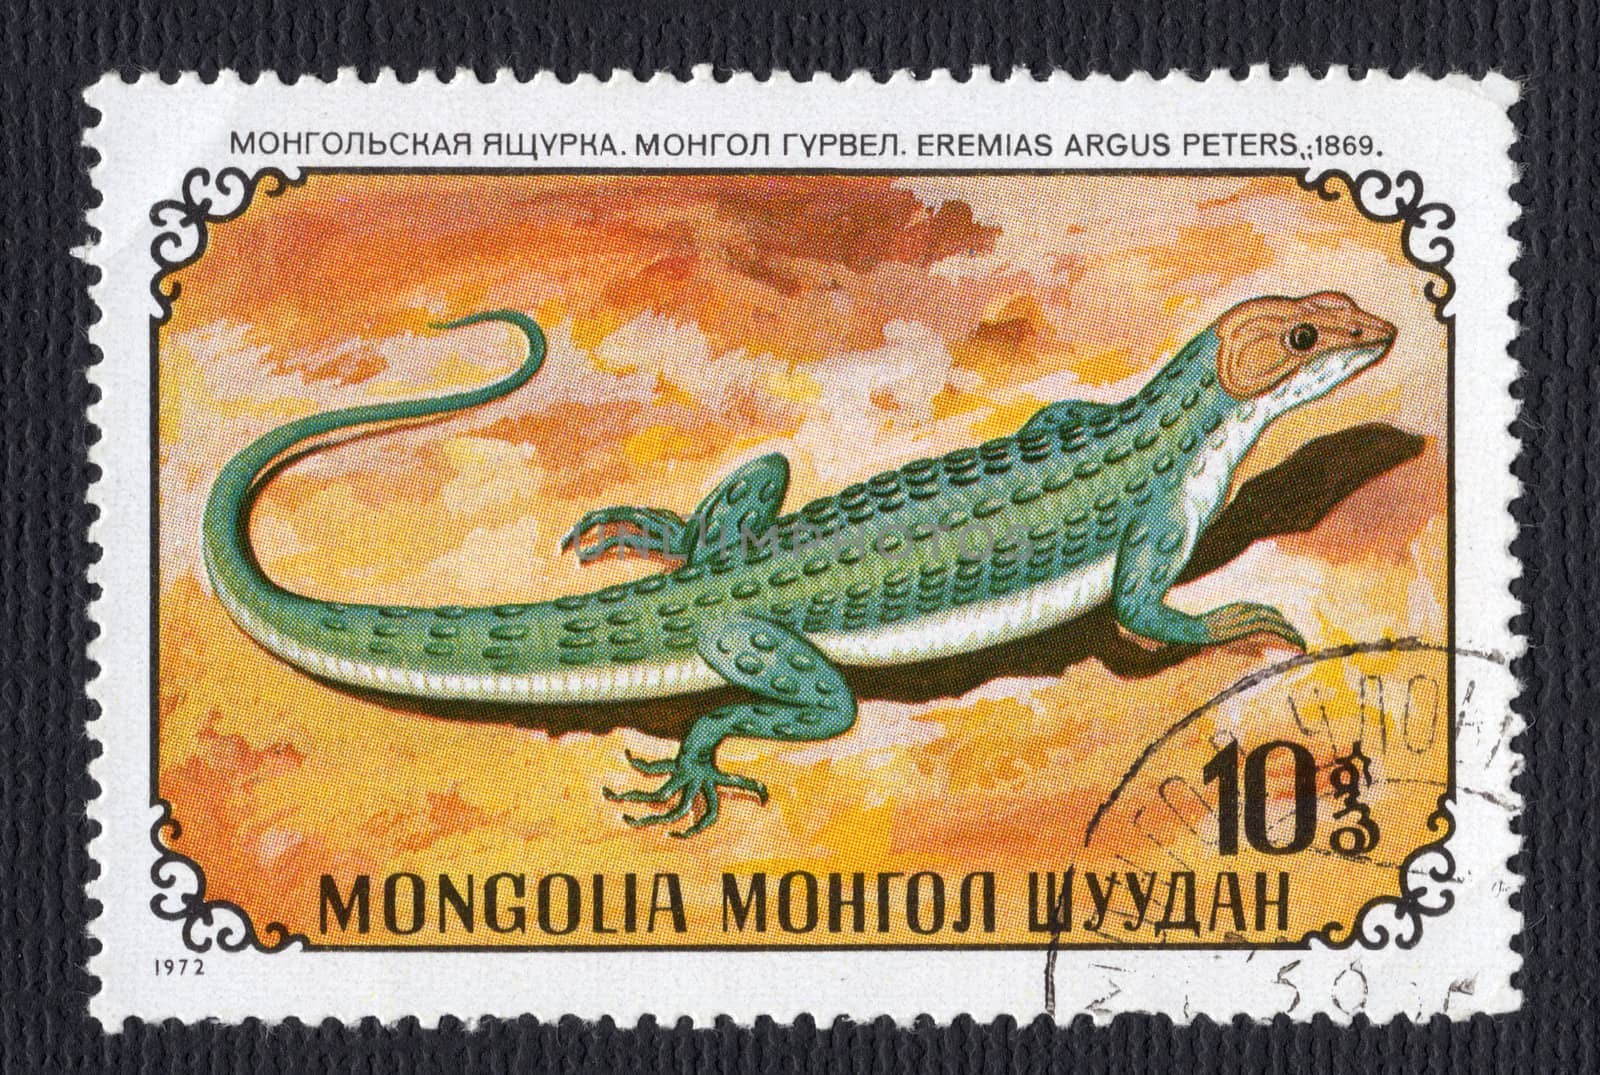 Mongolian Lizard Stamp by d40xboy